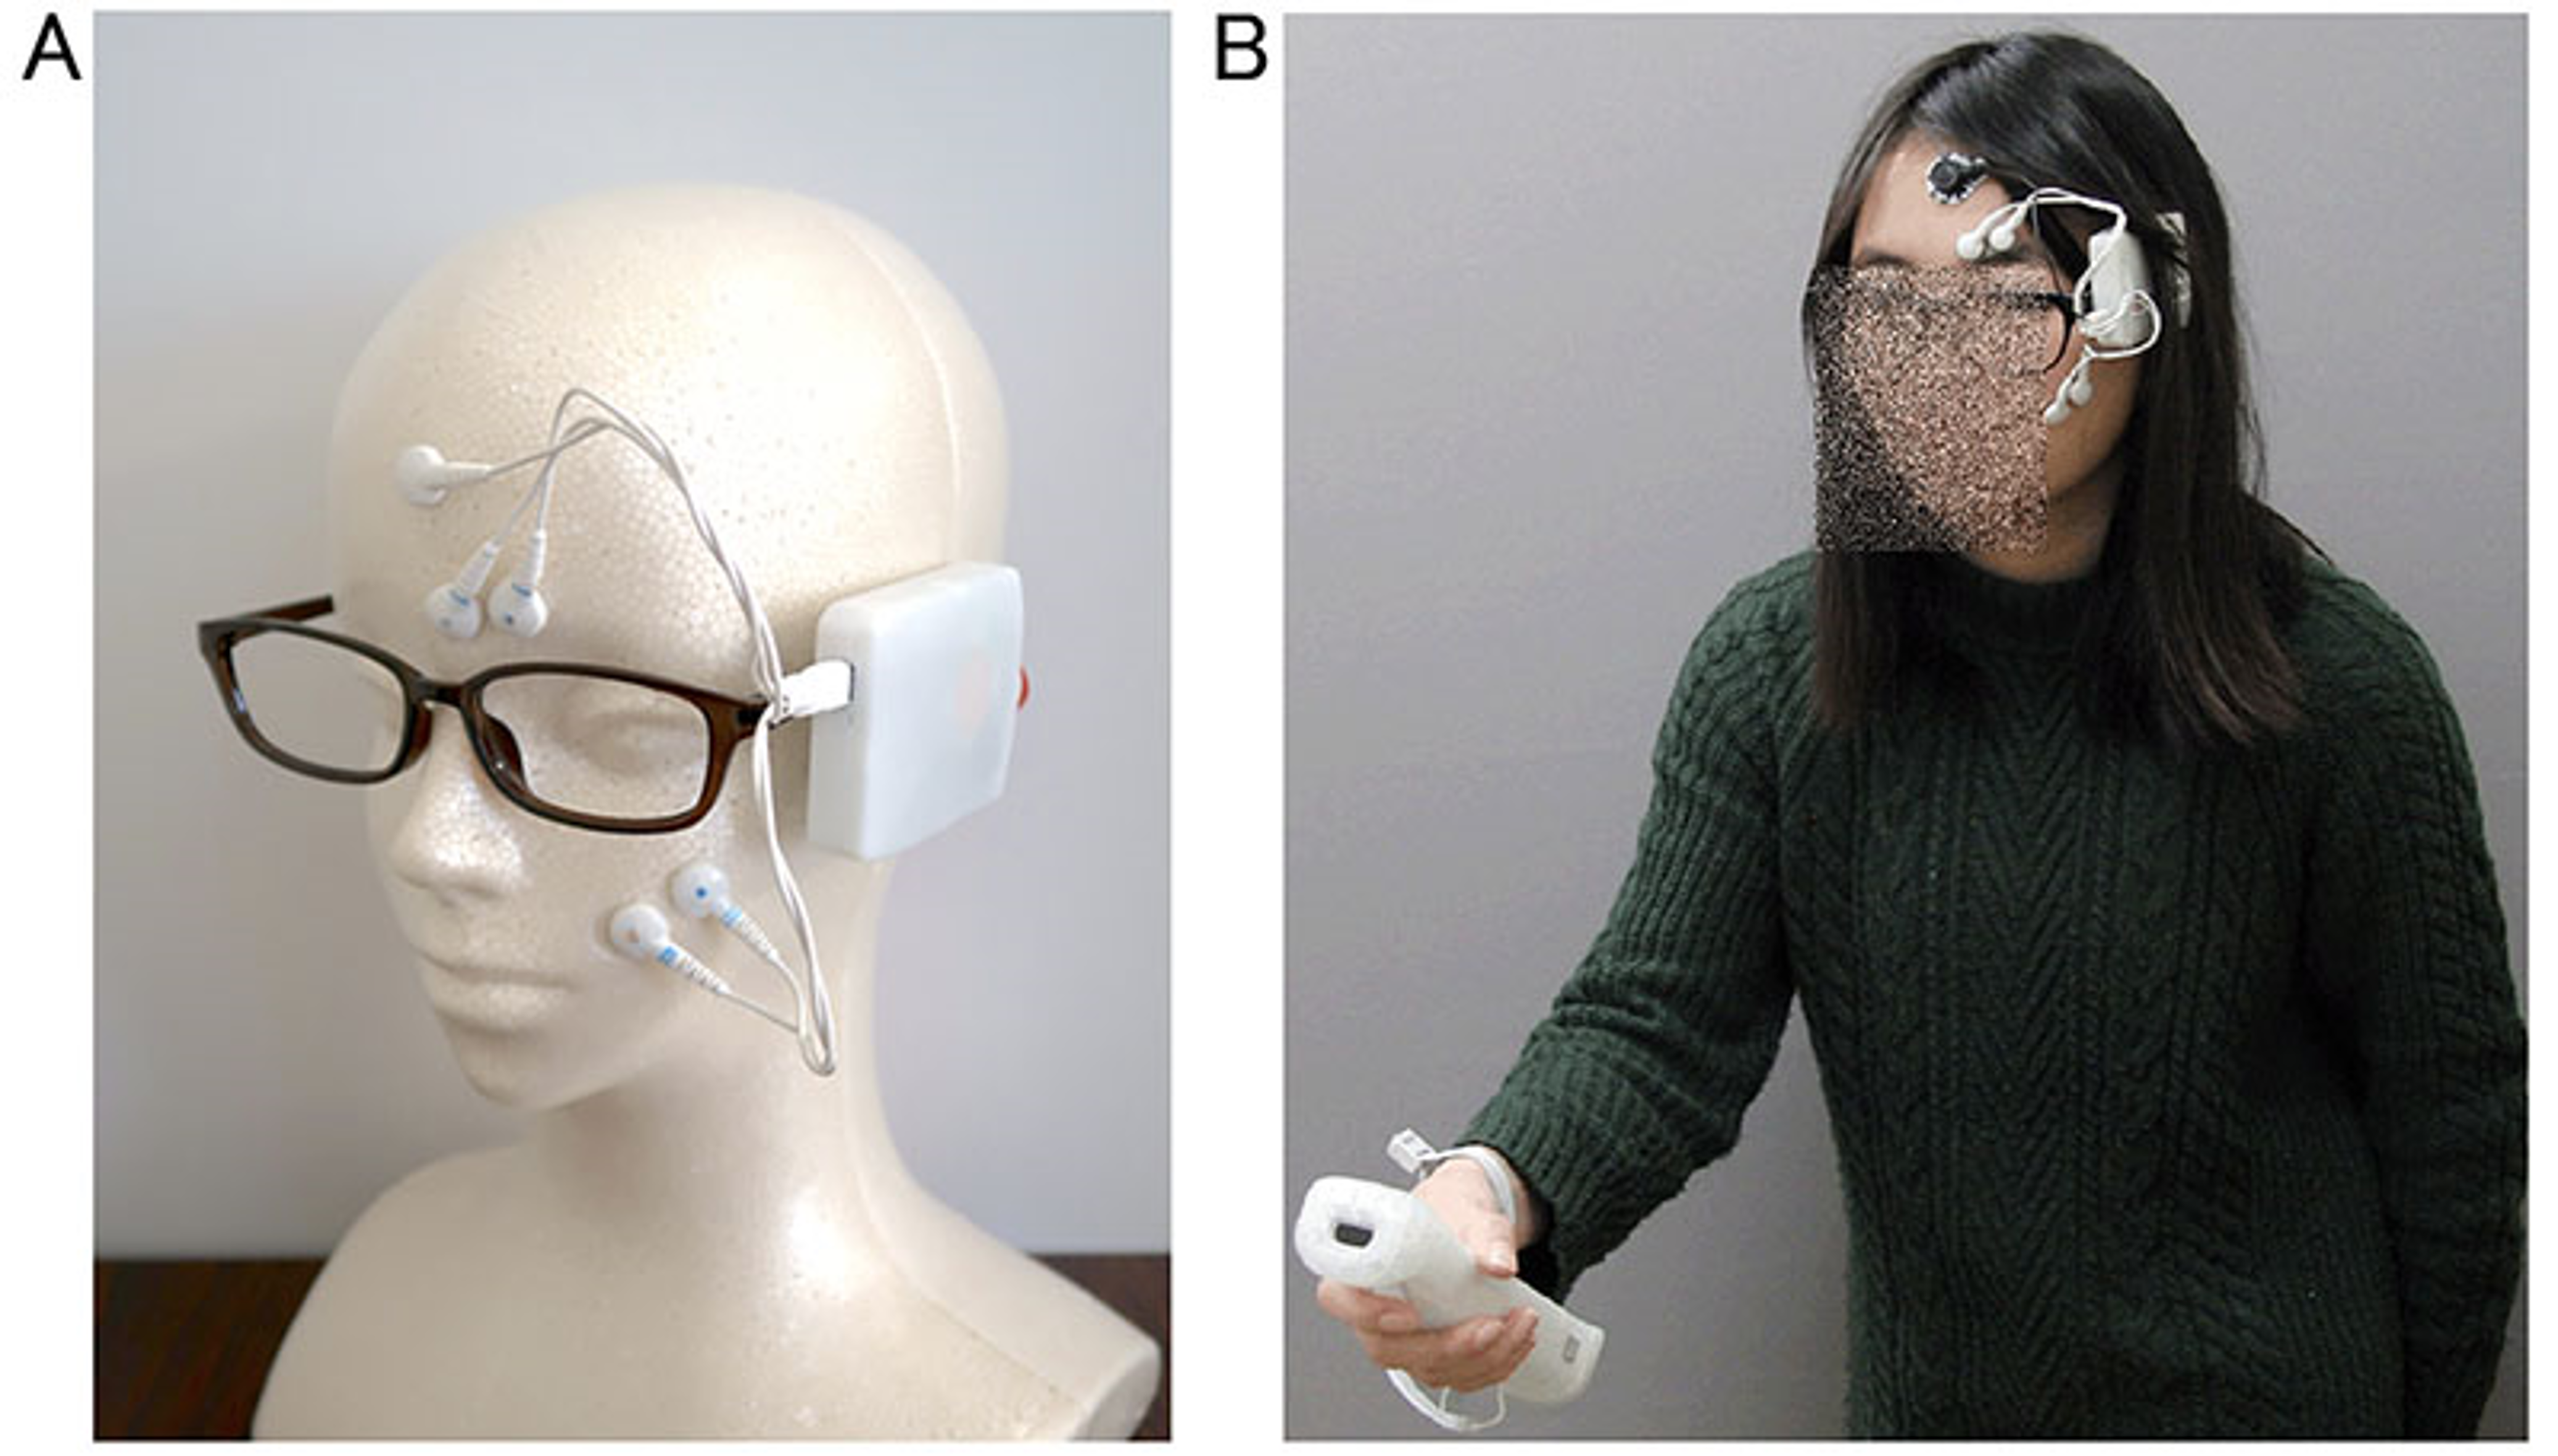 Emotional valence sensing using a wearable facial EMG device